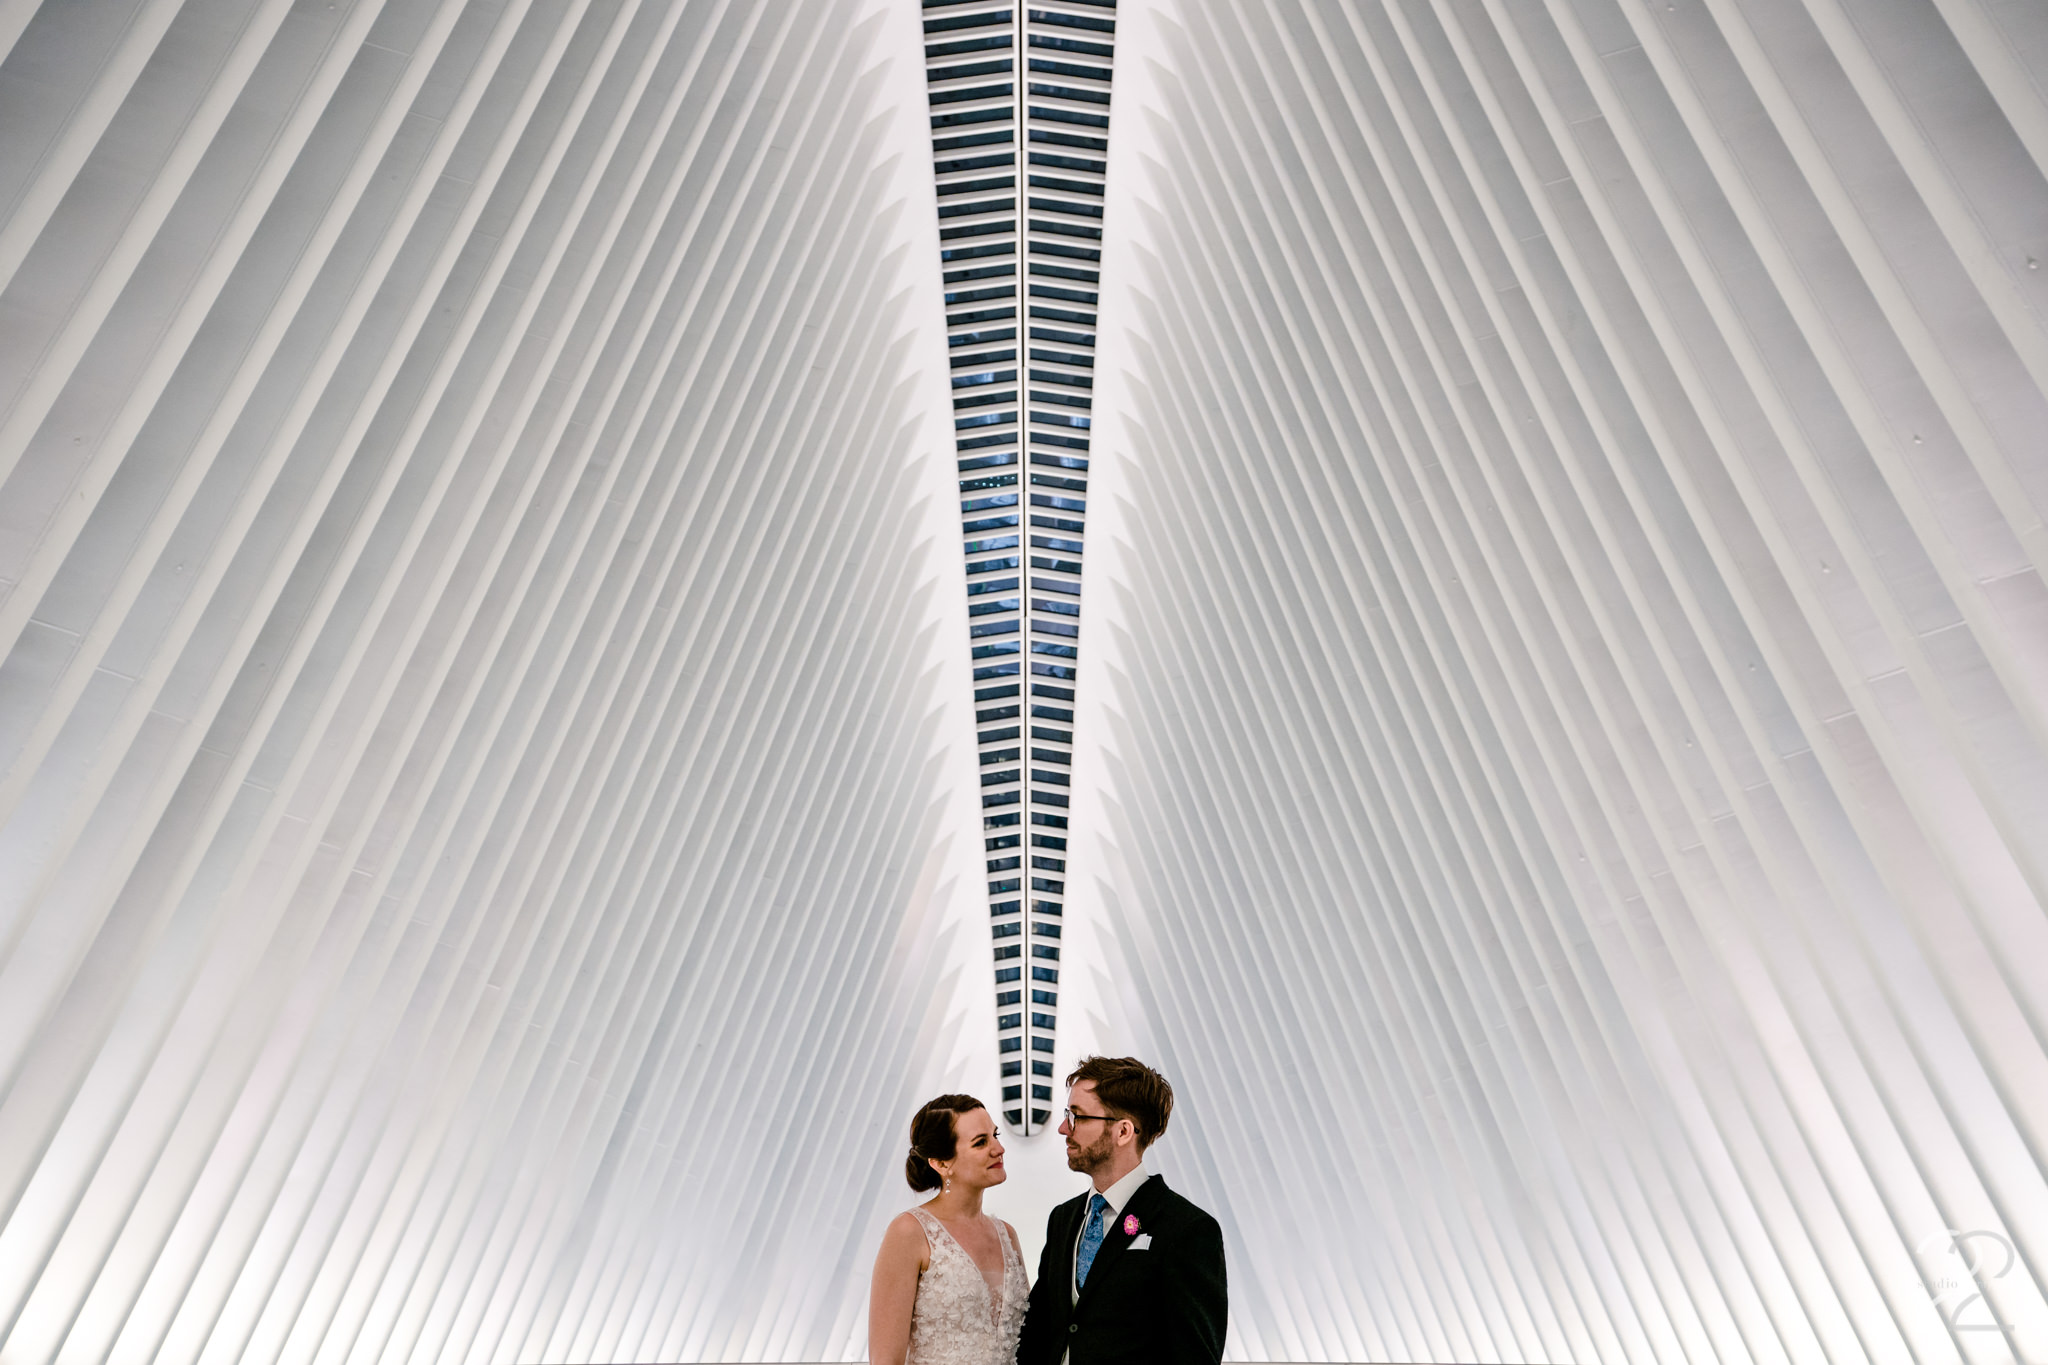  New York City is full of endless opportunities for outstanding wedding photos, so choosing a spot for unique bride and groom portraits was a tough decision. Megan ended up taking Kenton and Sarah to Oculus for a modern, clean, urban look. 